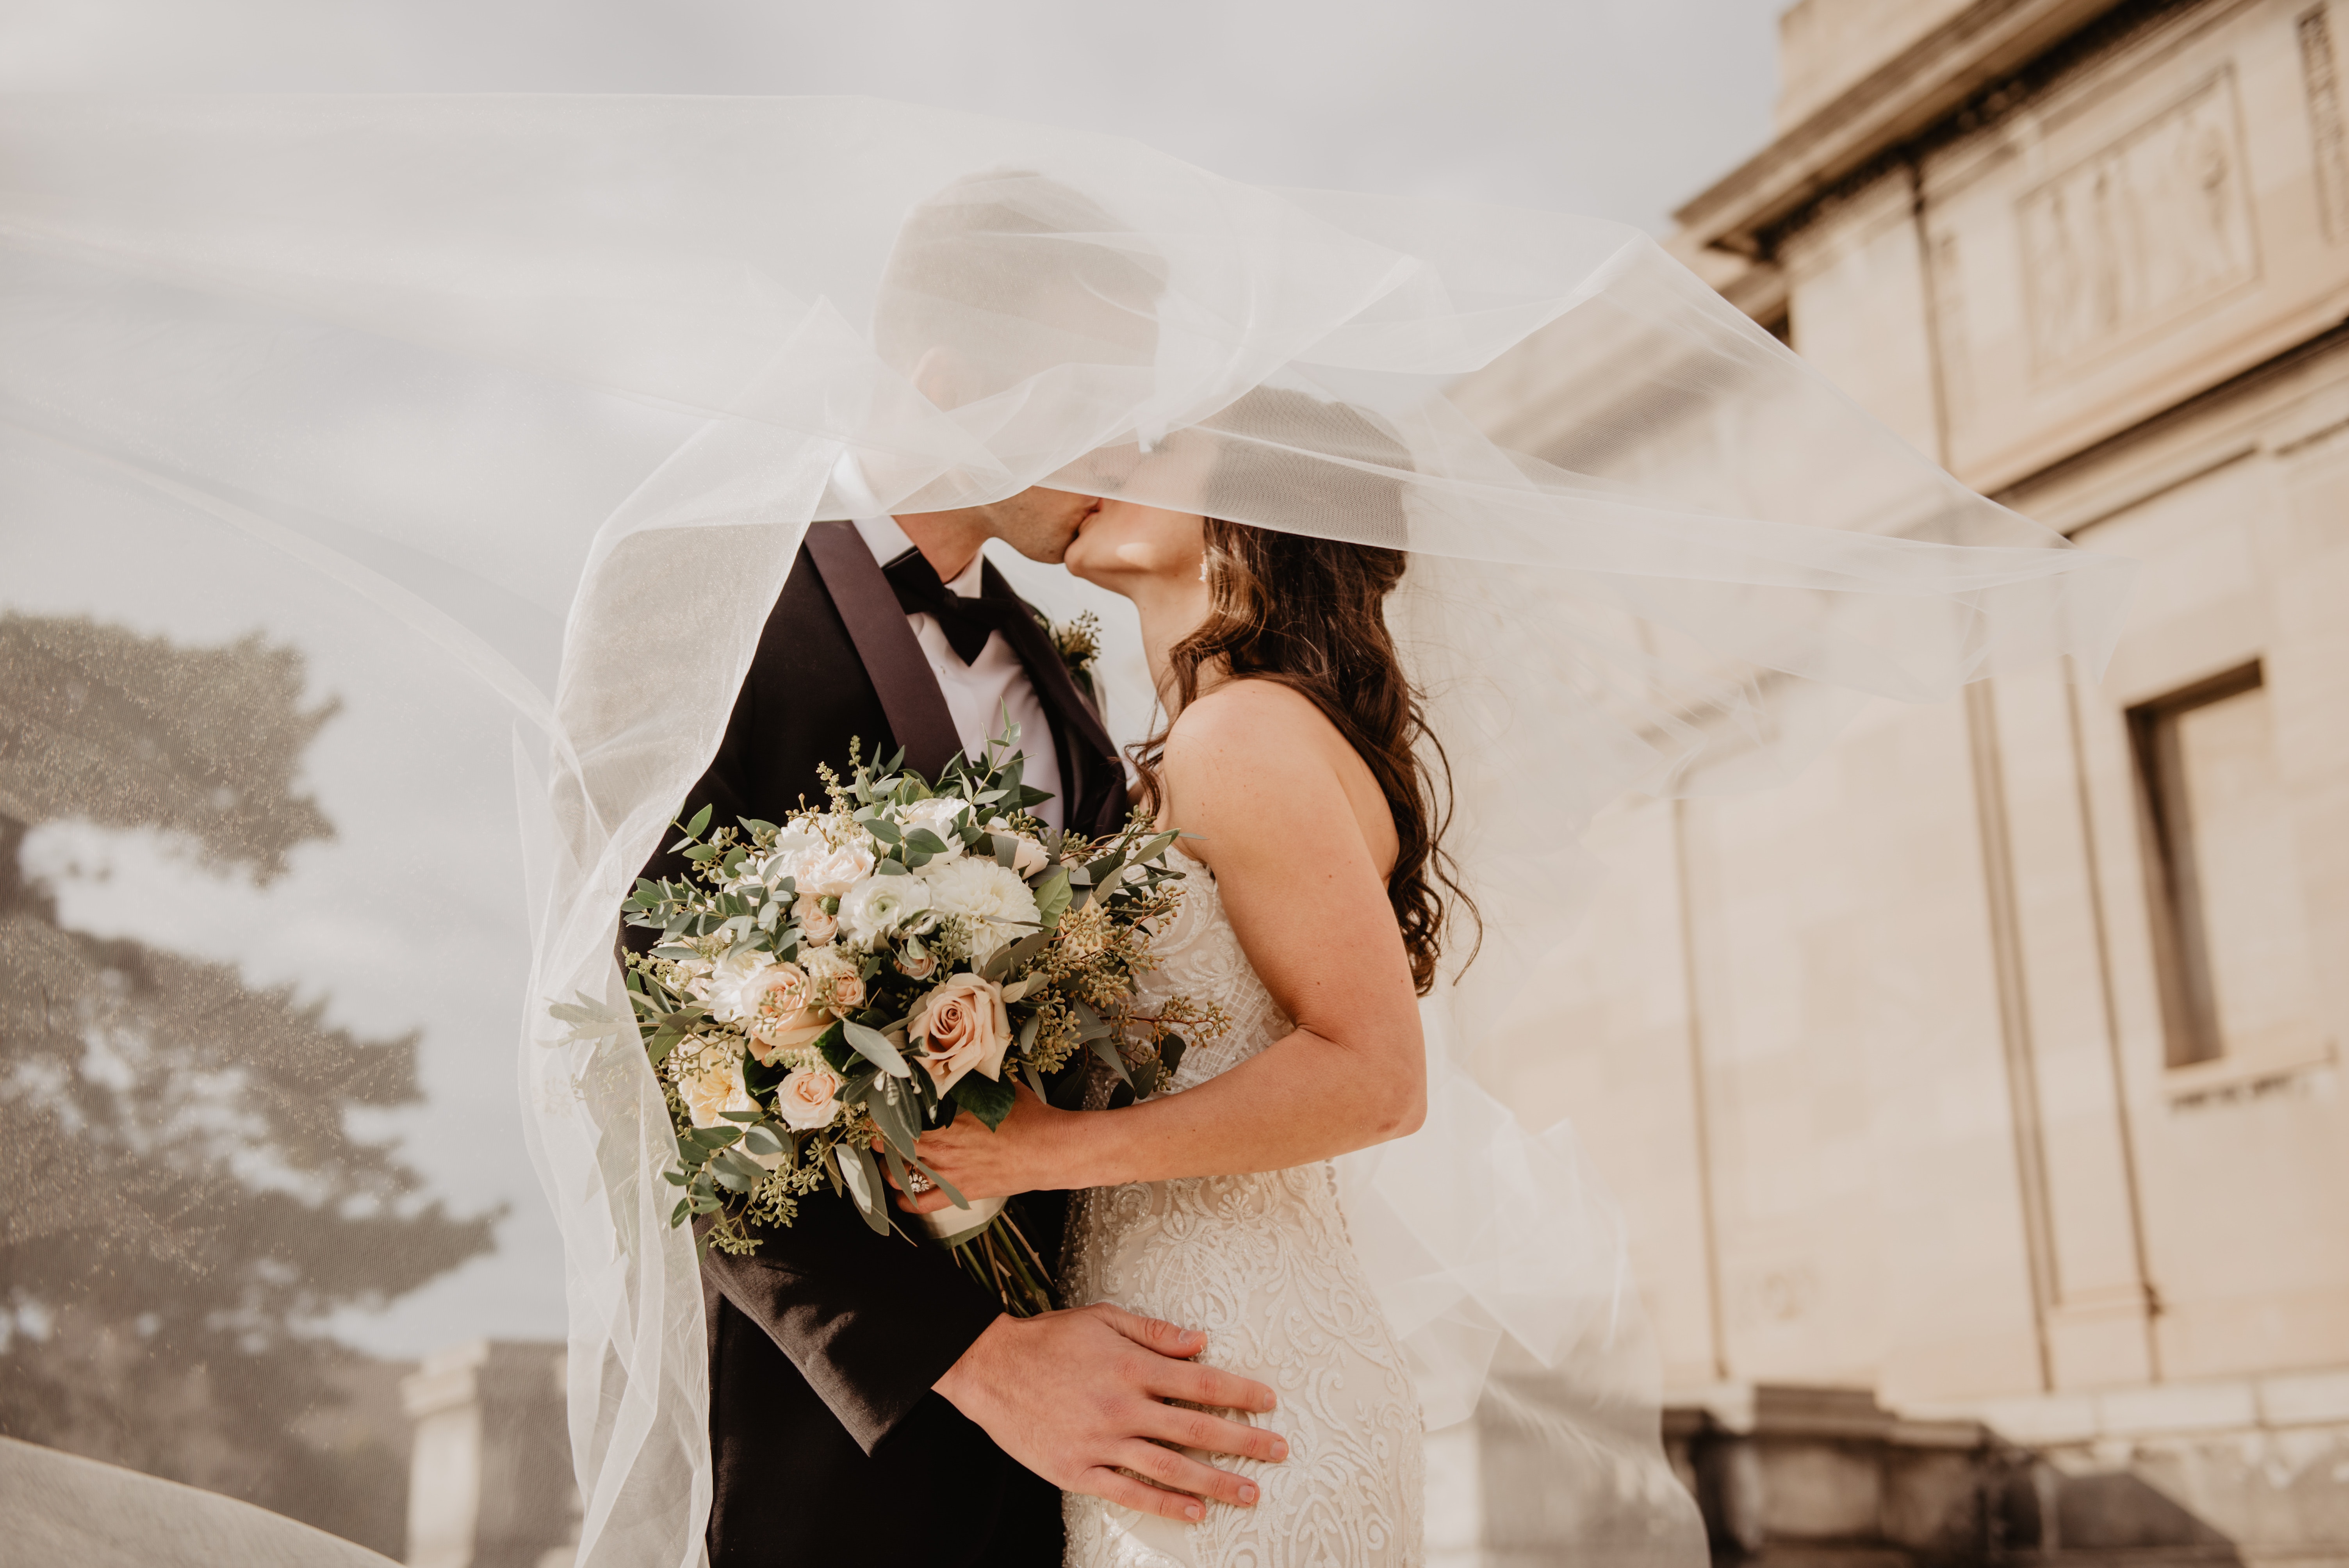 Blog  When To Say “I Do” In 2023: Our Best Wedding Date Recommendations